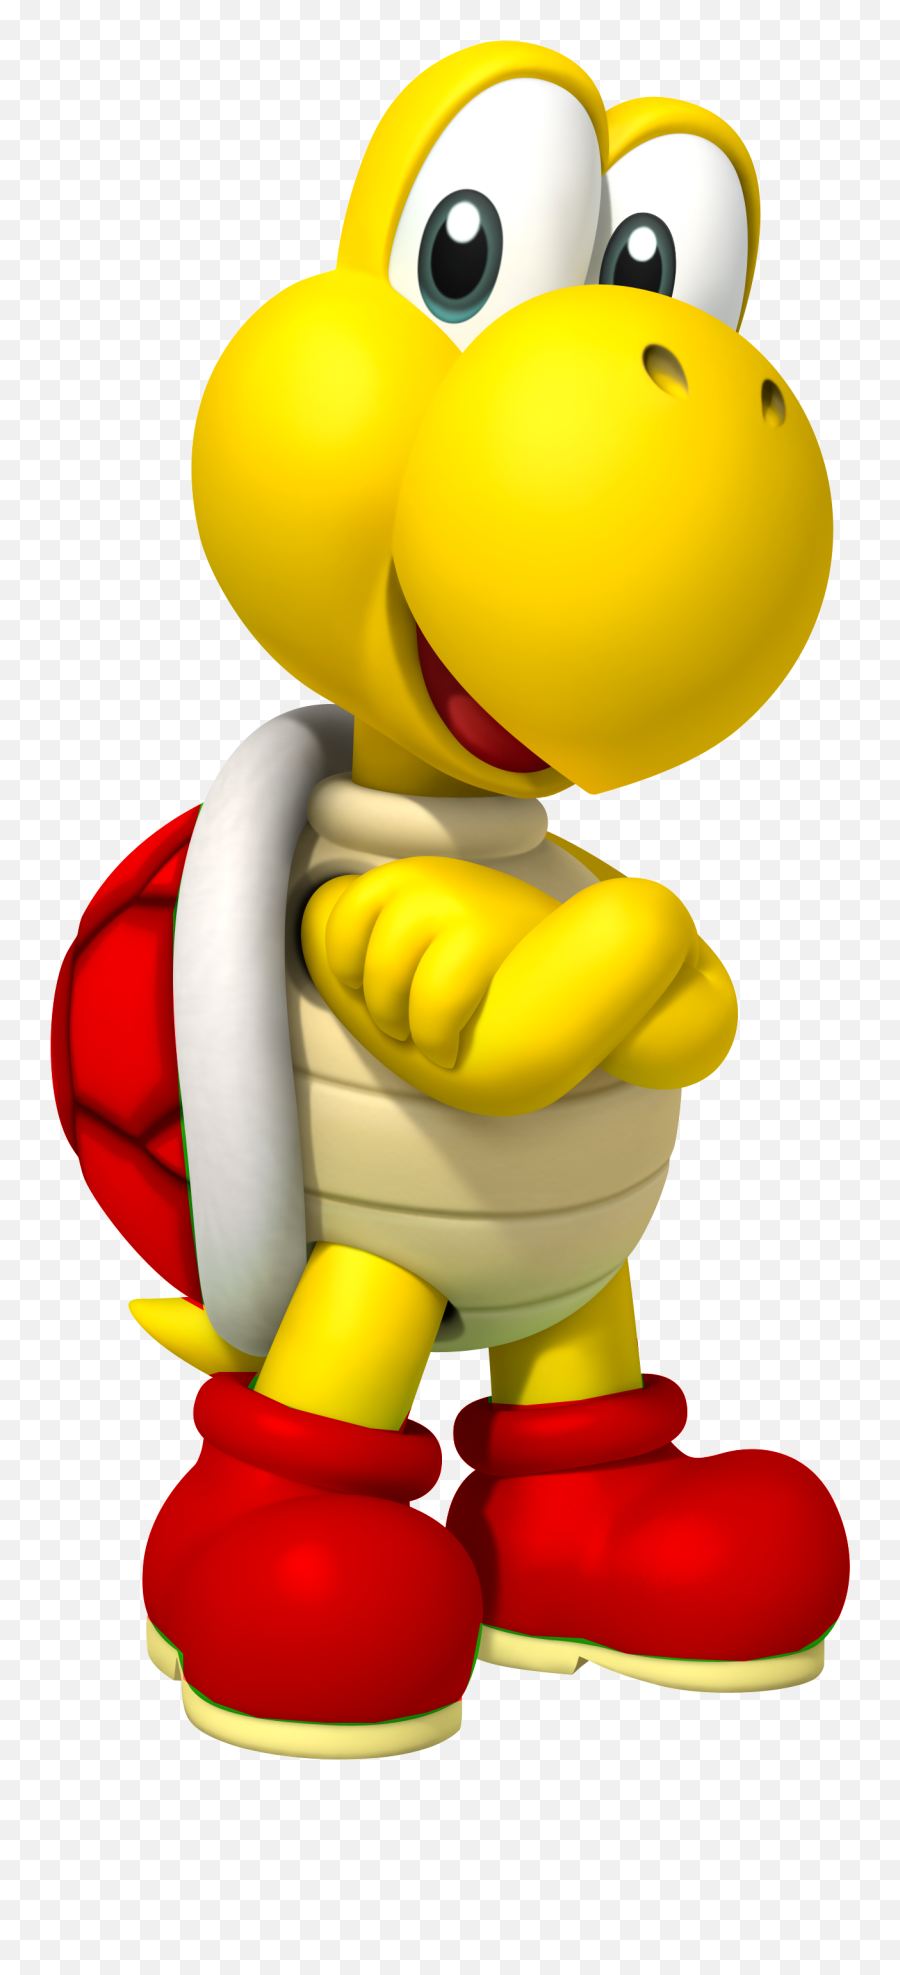 Download Shy Guy And Koopa Troopa - Full Size Png Image Pngkit Koopa Troopa Png,Shy Guy Png